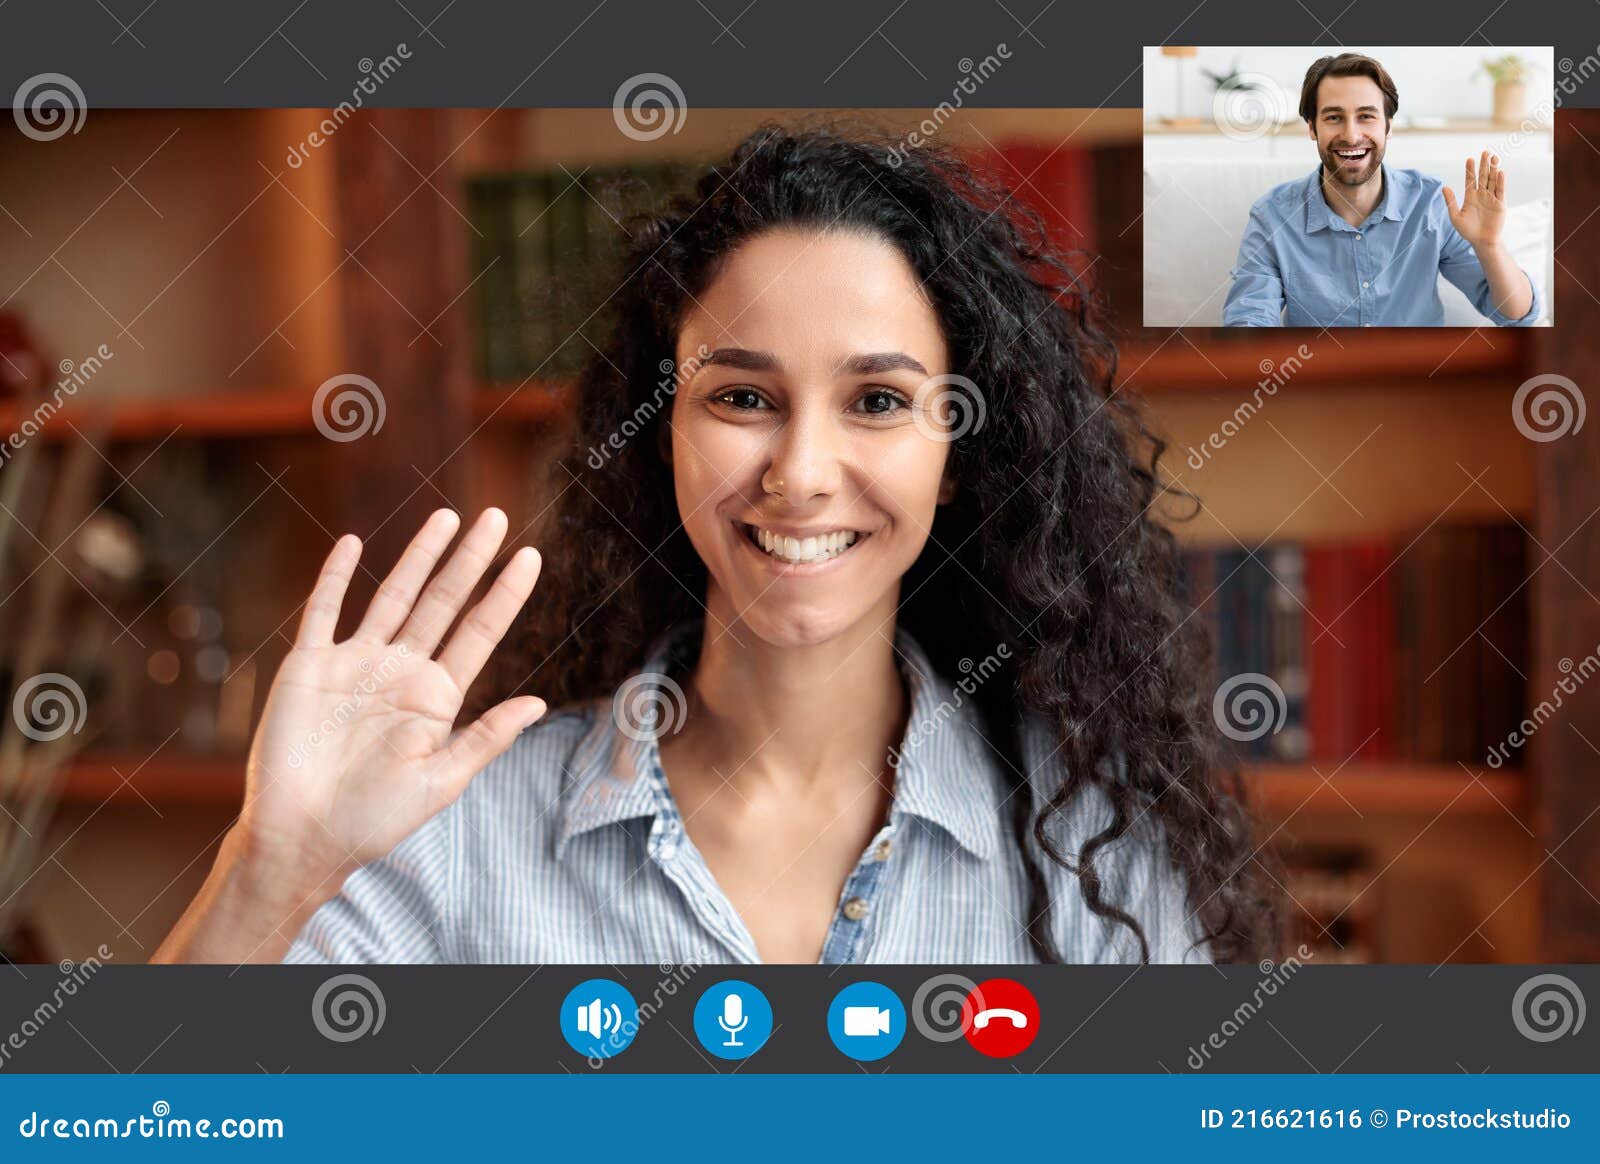 online communication. millennial man and woman having web conference on laptop, screenshot